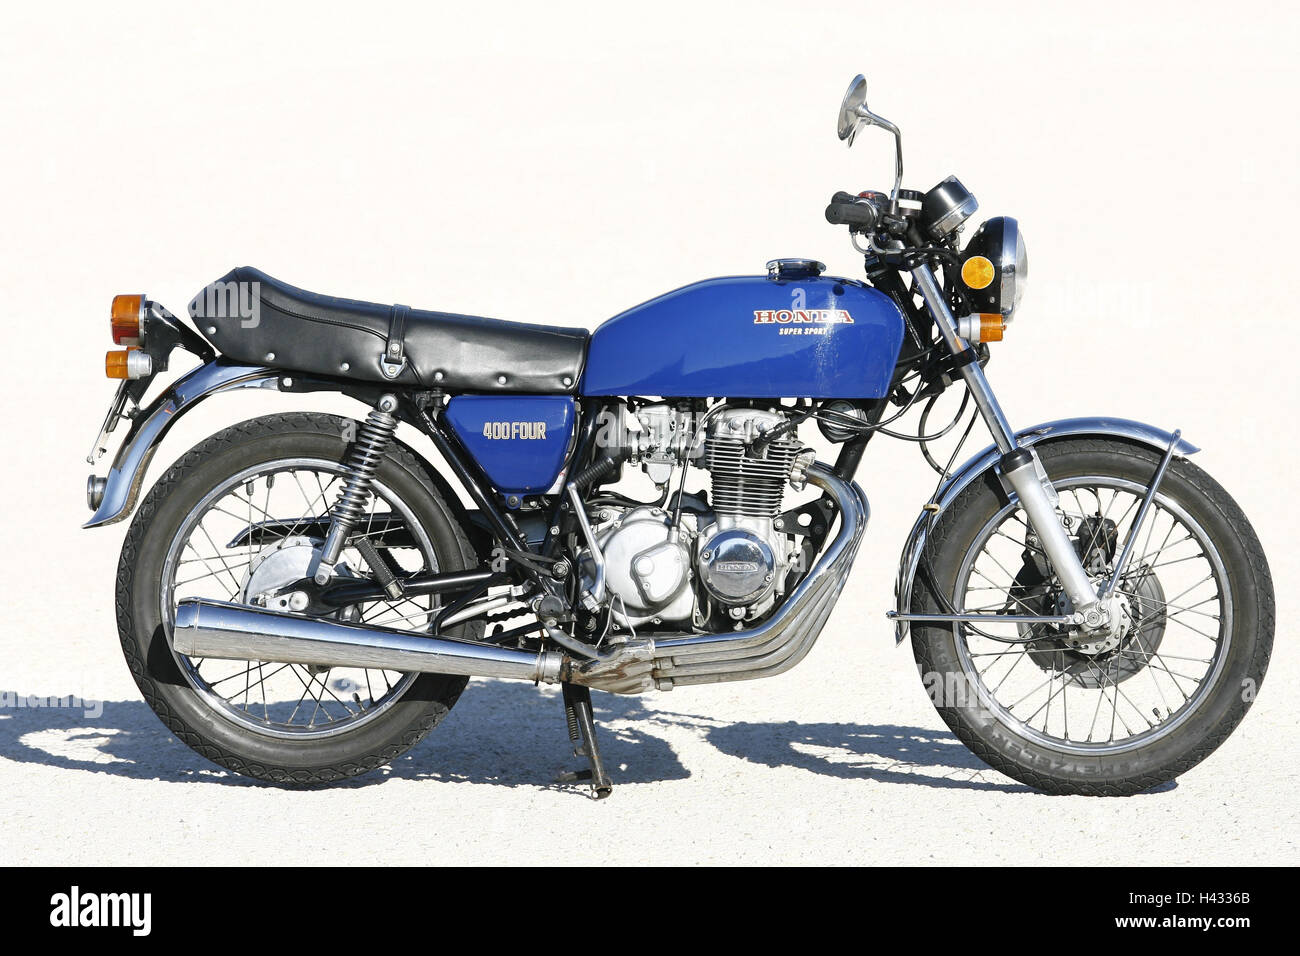 Honda Cb 400 Four High Resolution Stock Photography and Images - Alamy